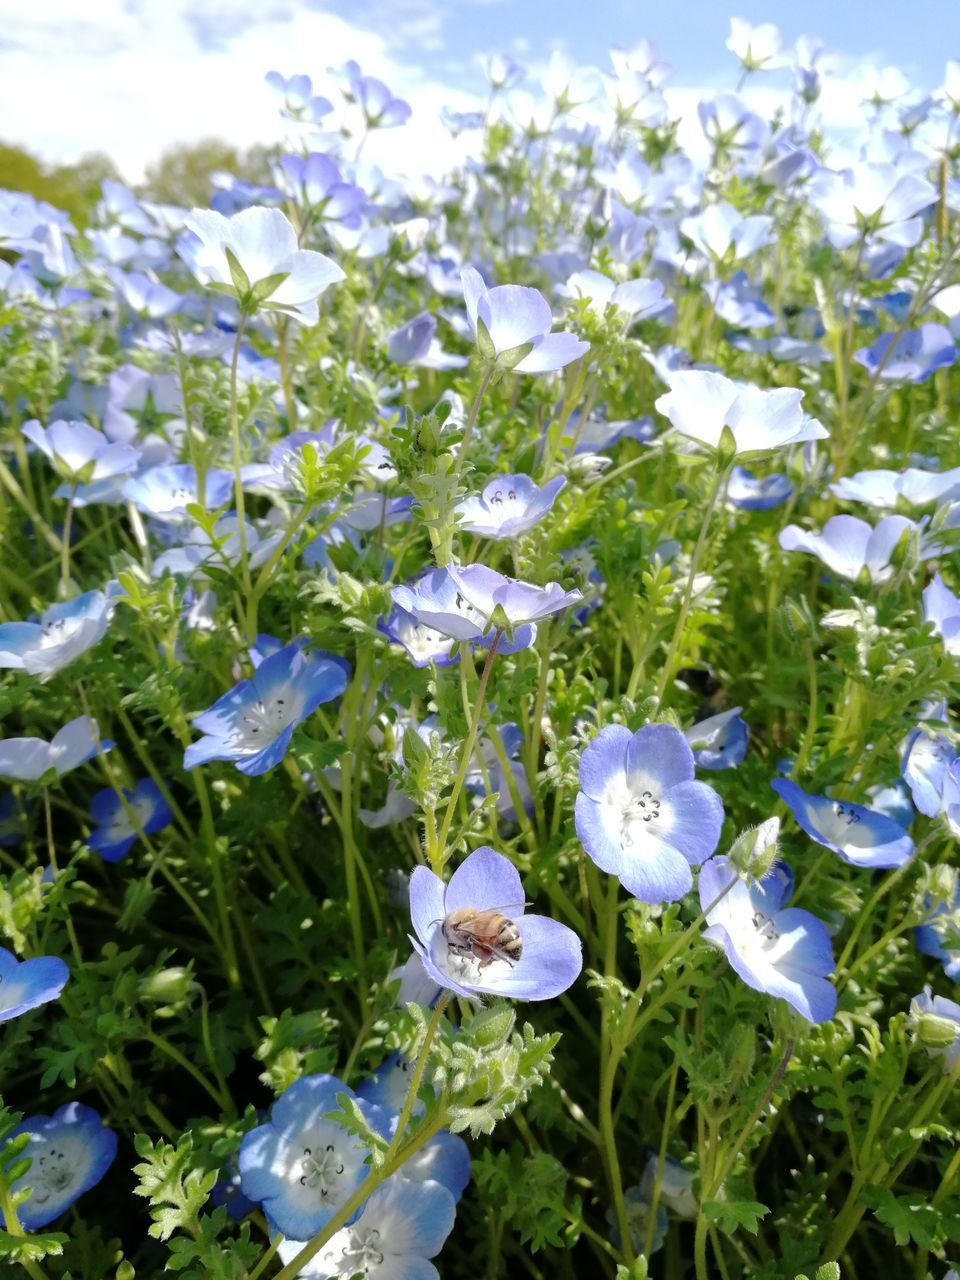 CLOSE-UP OF FRESH WHITE FLOWERING PLANTS IN FIELD